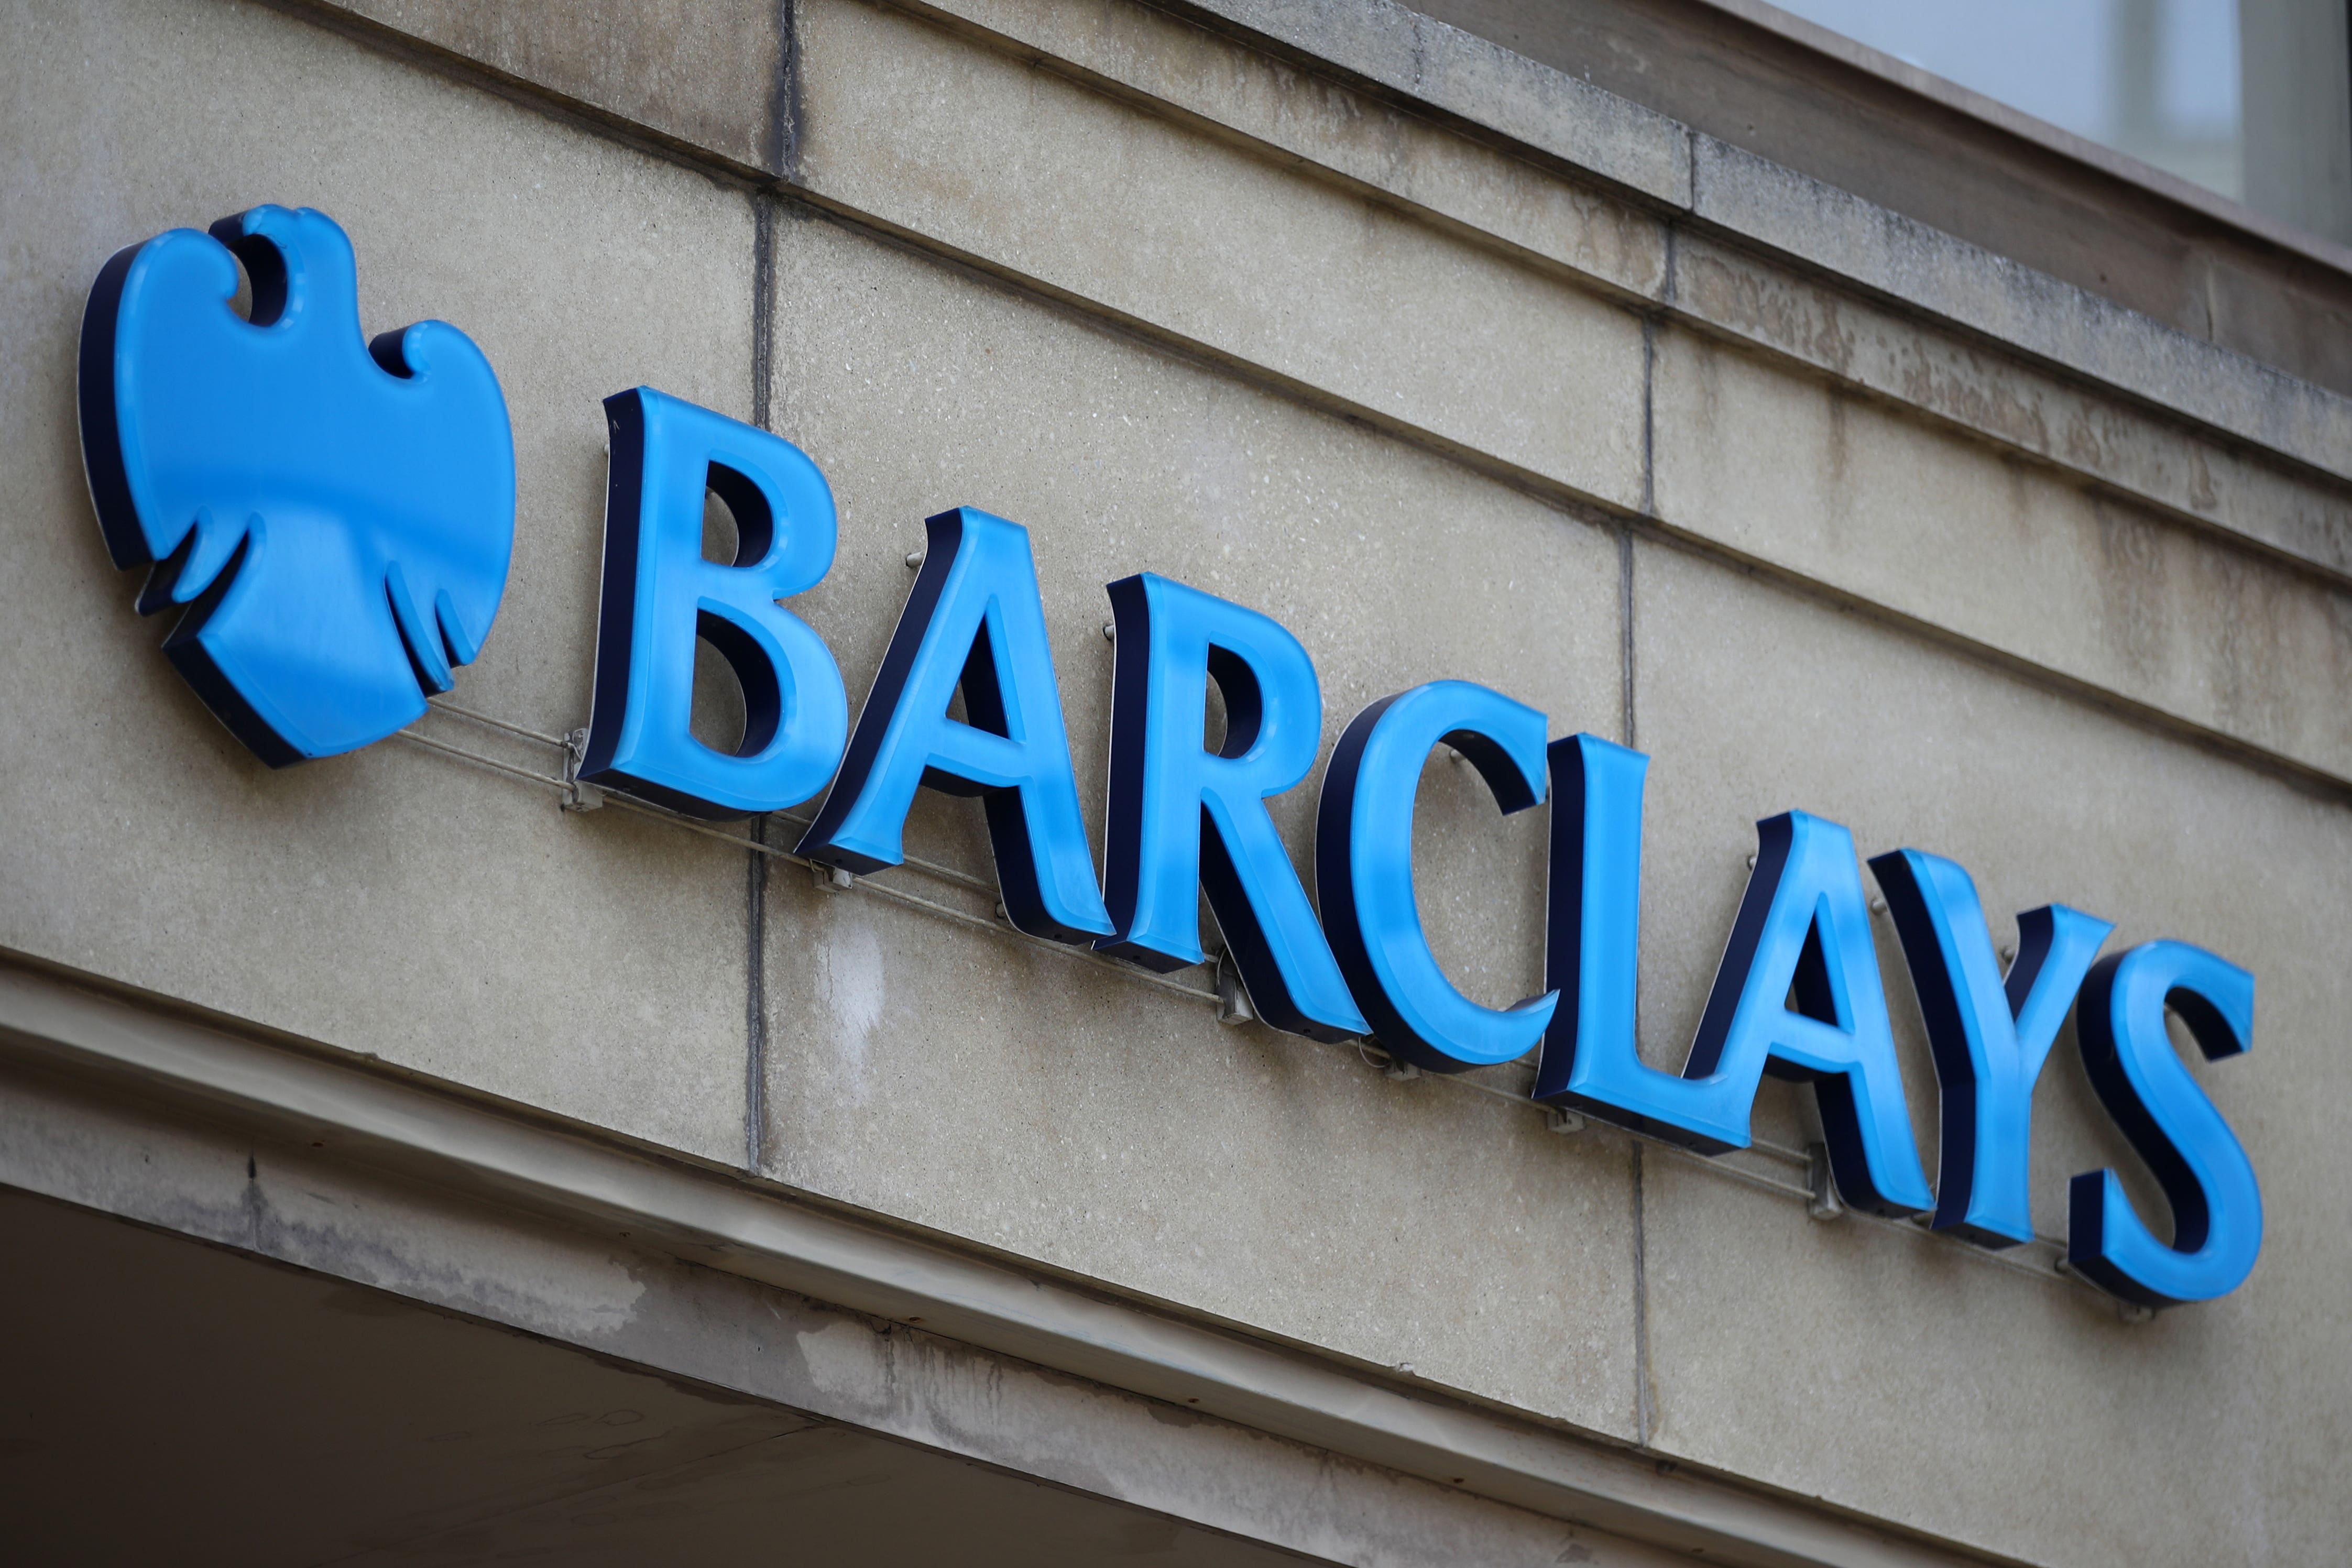 Barclays has revealed its profits fell by 14% to £7 billion in 2022 as it set aside £1.2 billion to cover expected loan losses amid rising mortgage rates (Tim Goode/ PA)